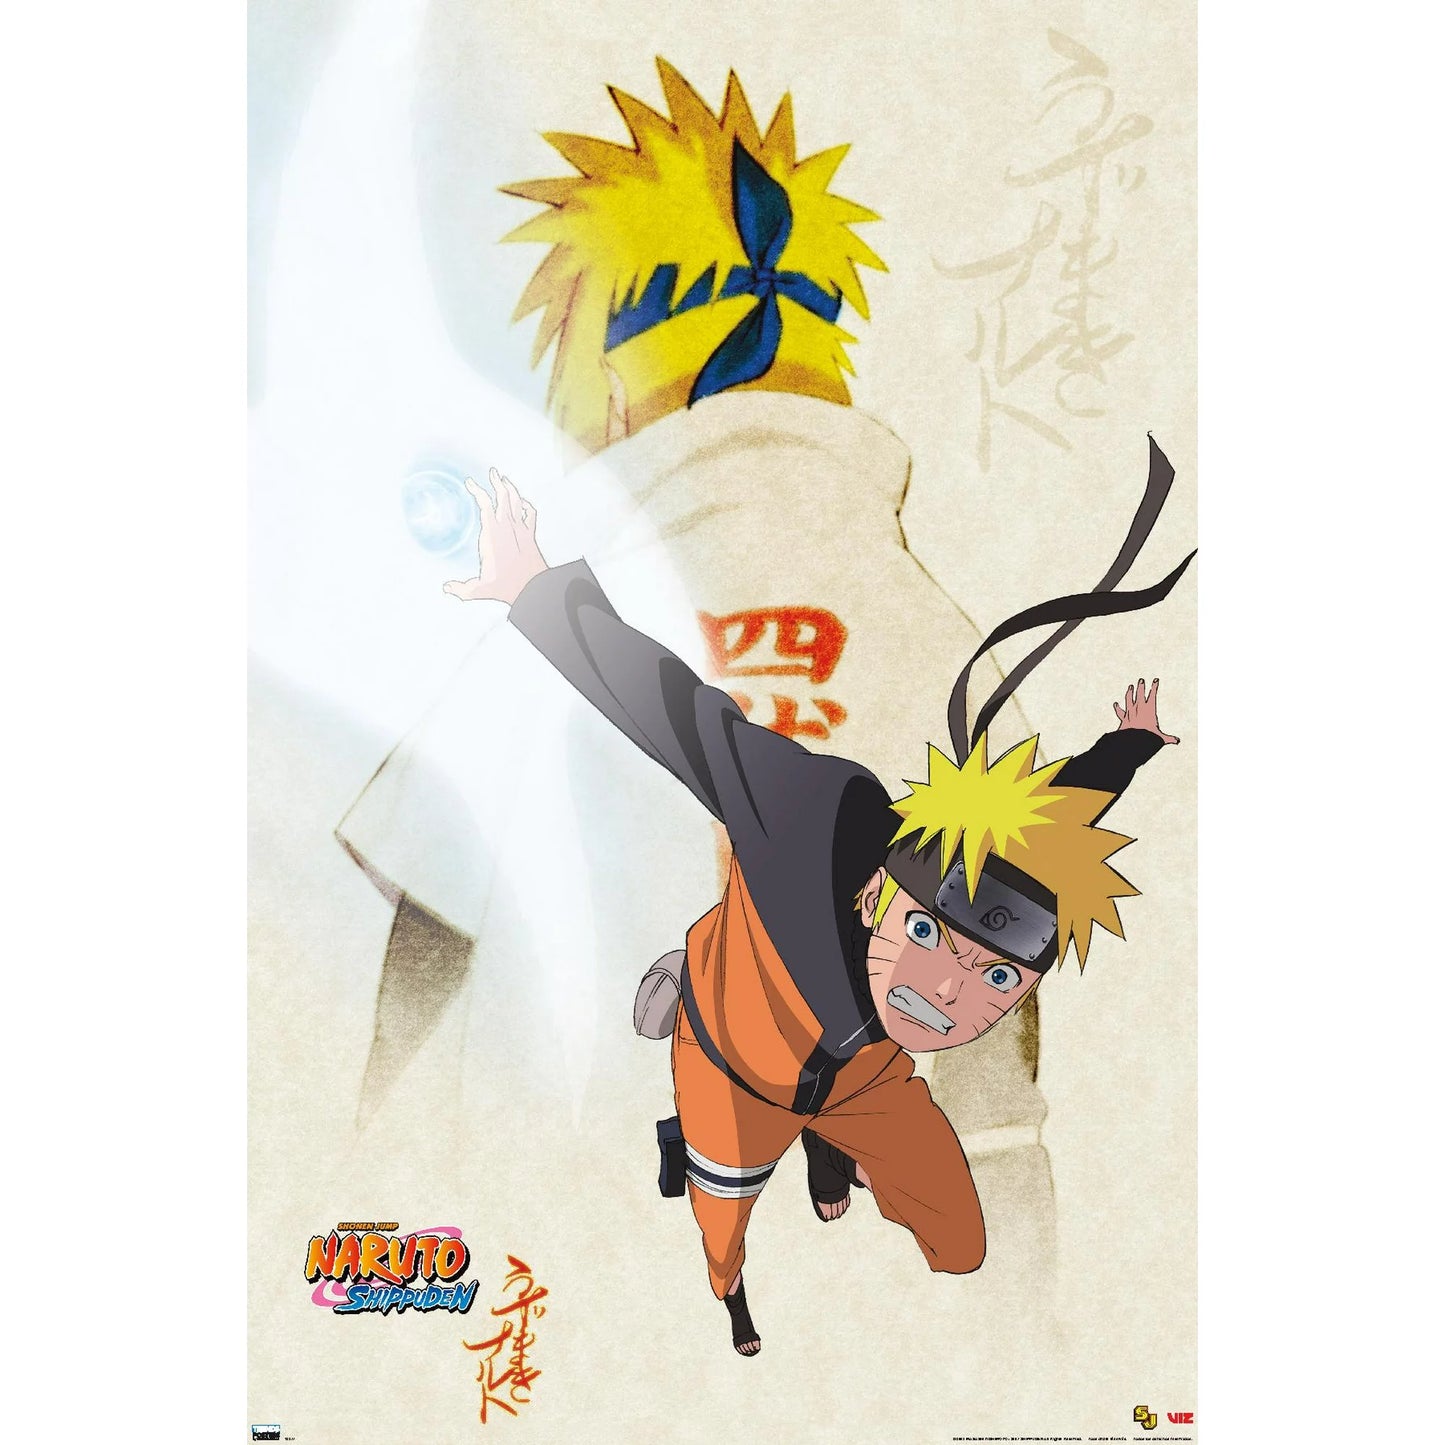 Naruto Powers Trends Poster, 22.375”x 34”, new in wrapper